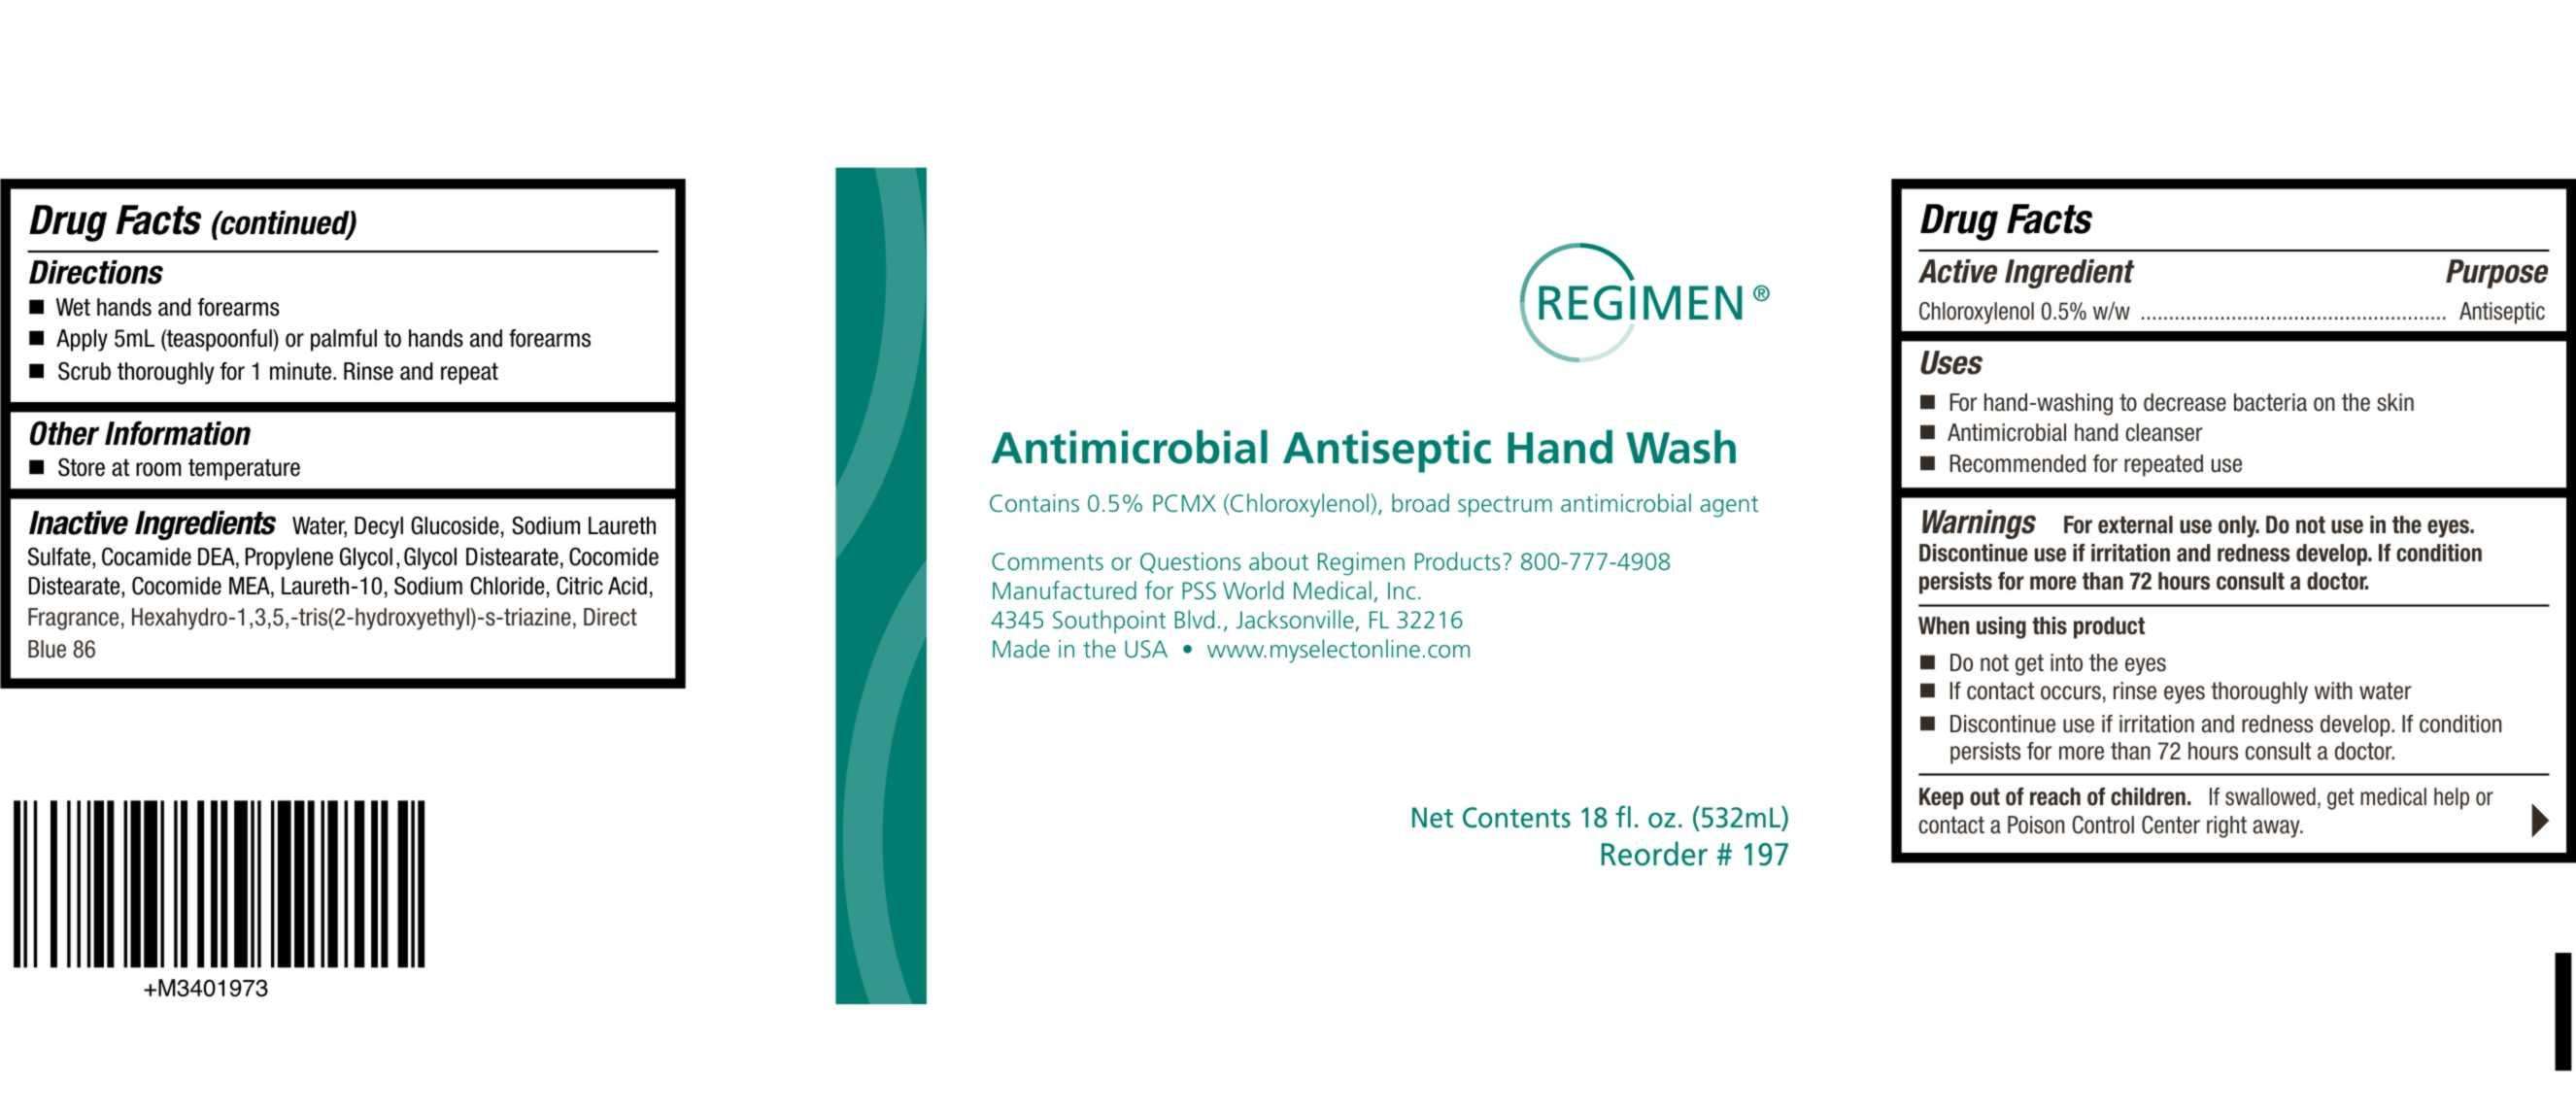 Antimicrobial Antiseptic Hand Wash